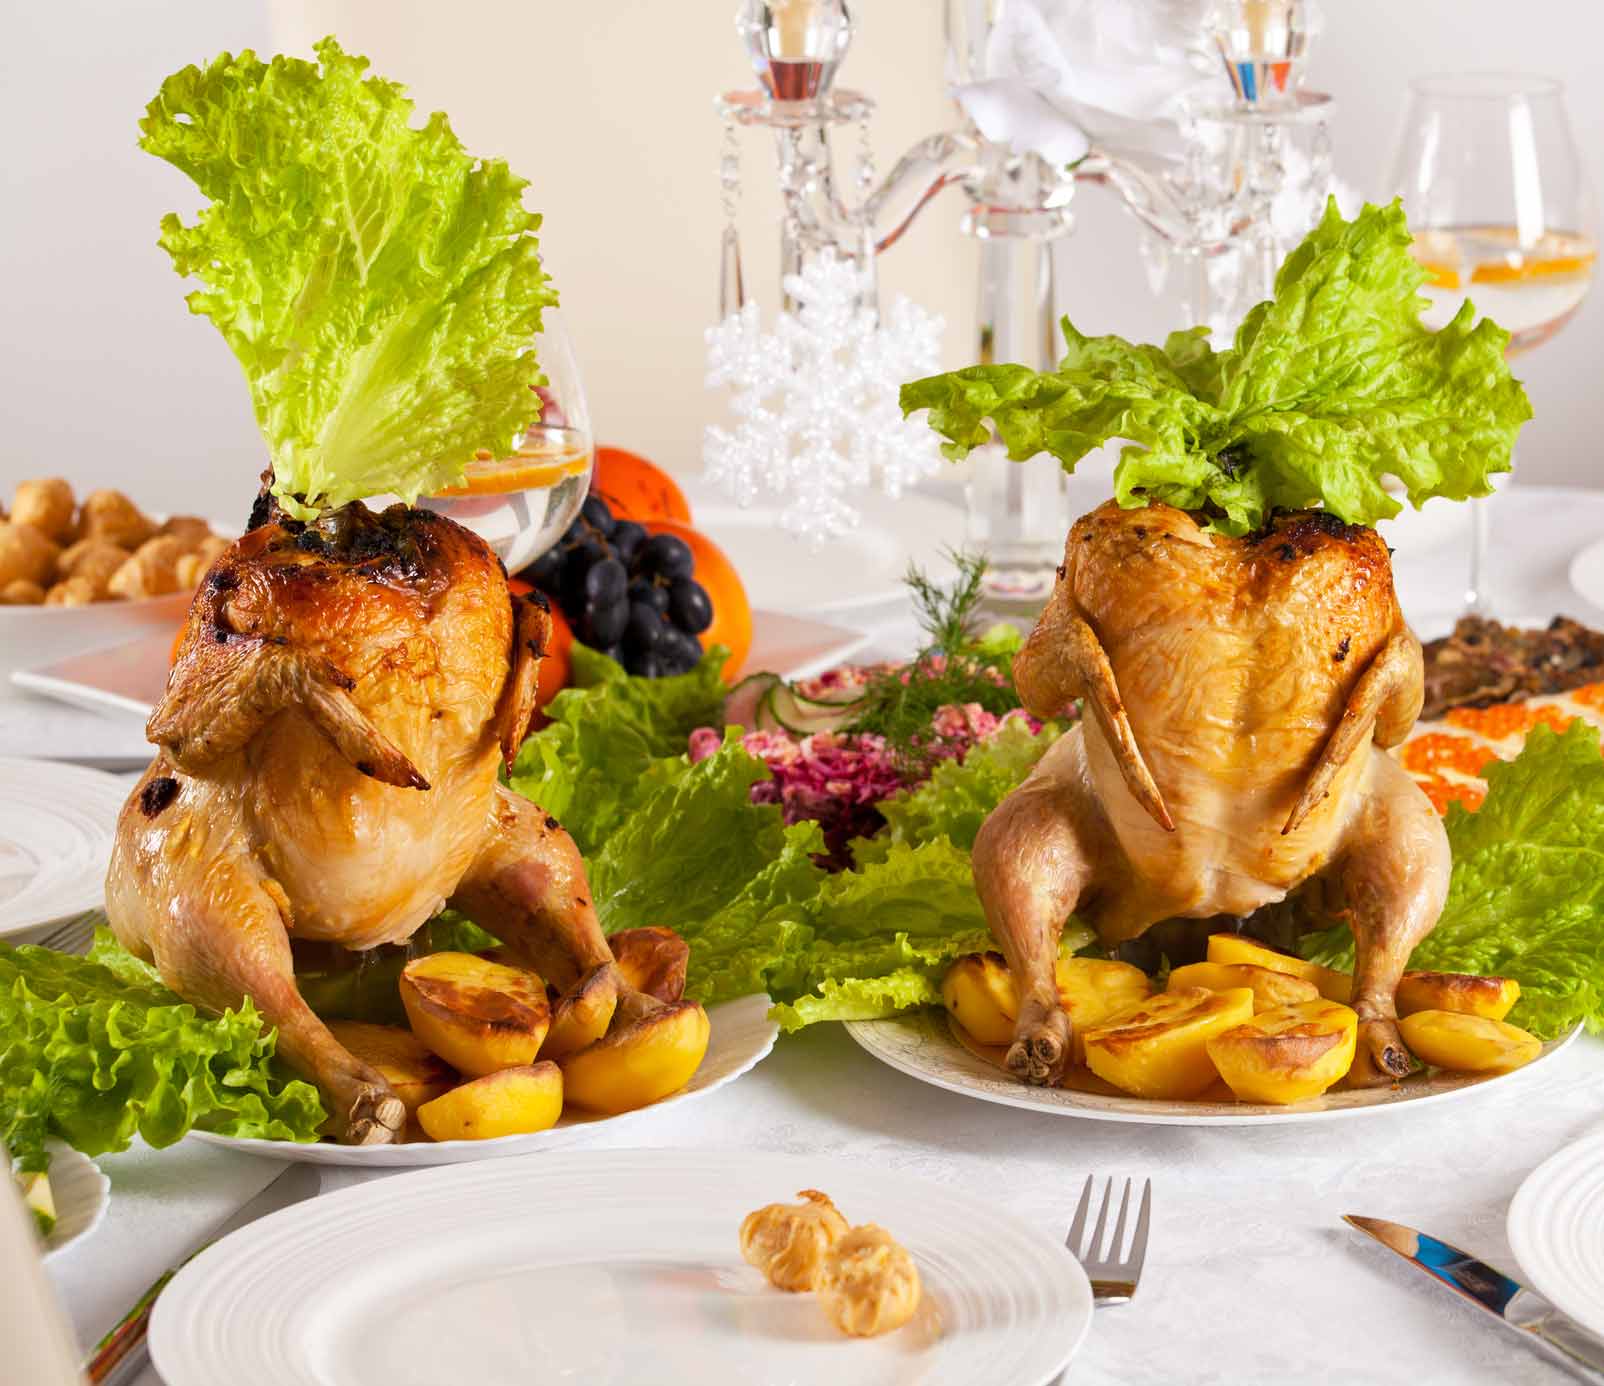 Two cornish game hens standing upright with lettuce leaf hats.